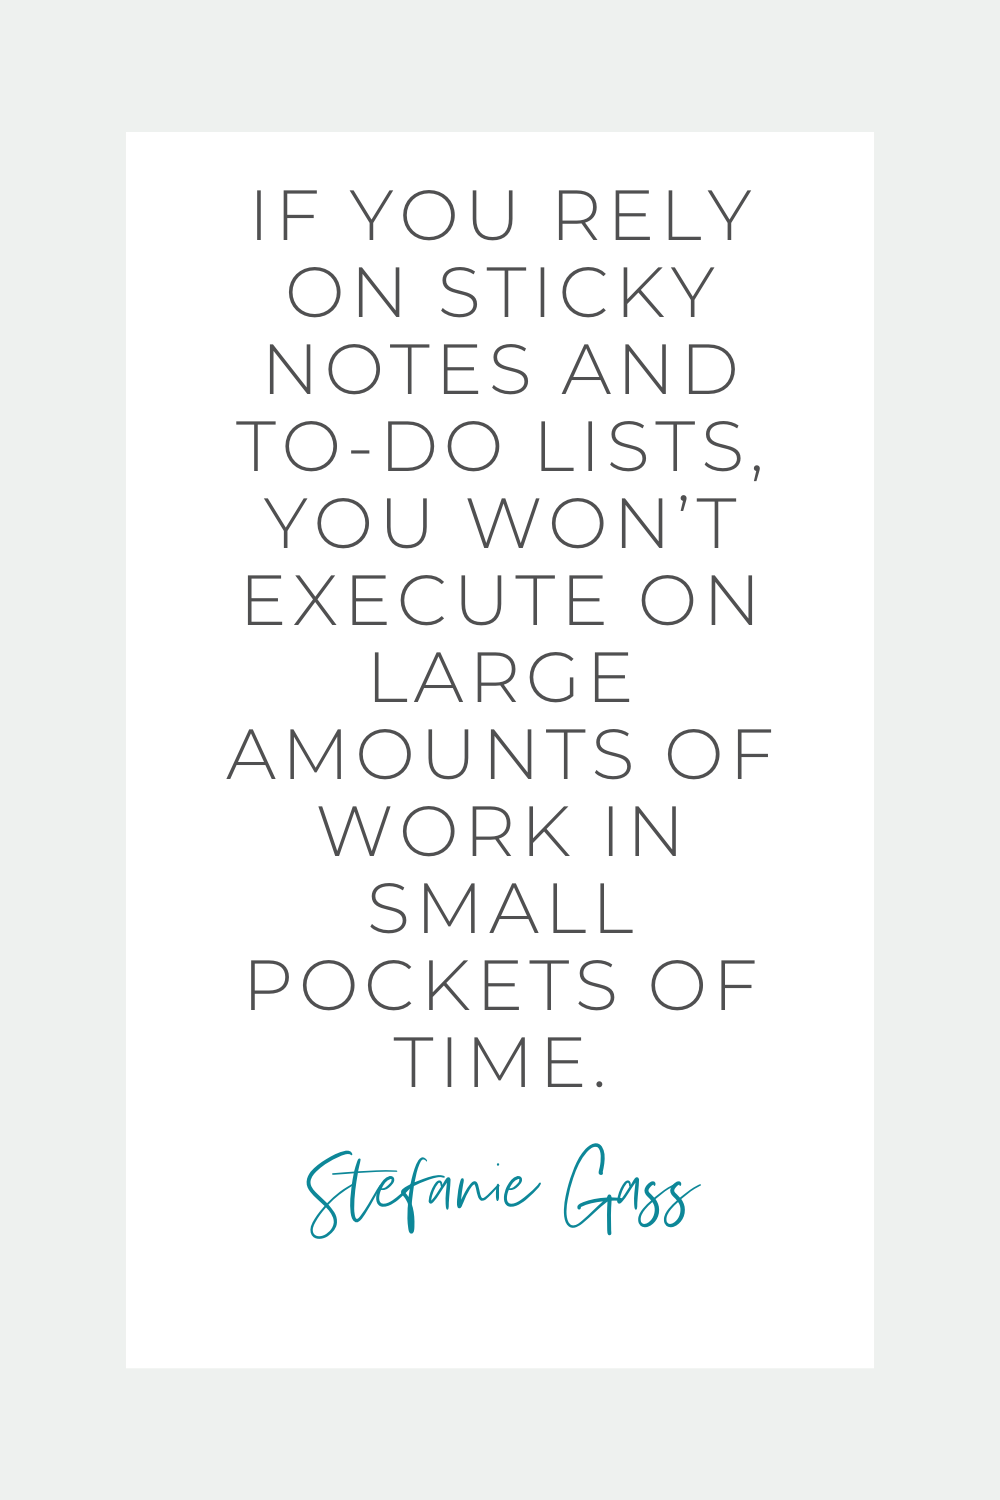 If you rely on sticky notes and to-do lists, you won't execute on large amounts of work in small pockets of time.  Stefanie Gass quote
